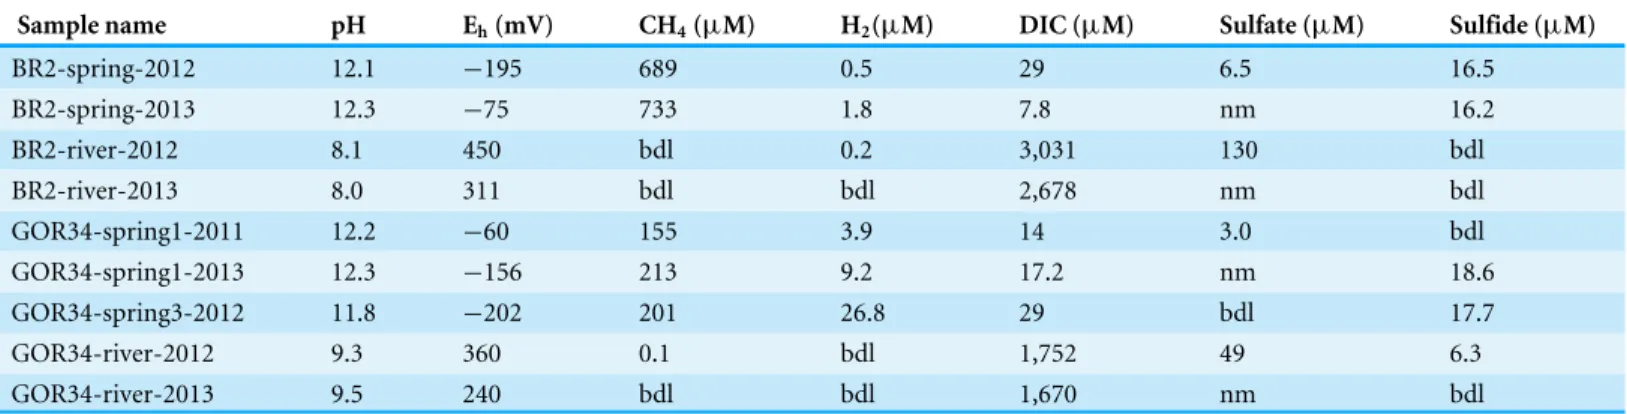 Table 1 Chemical characteristics of ultrabasic springs and adjacent rivers of the Voltri Massif, Italy.